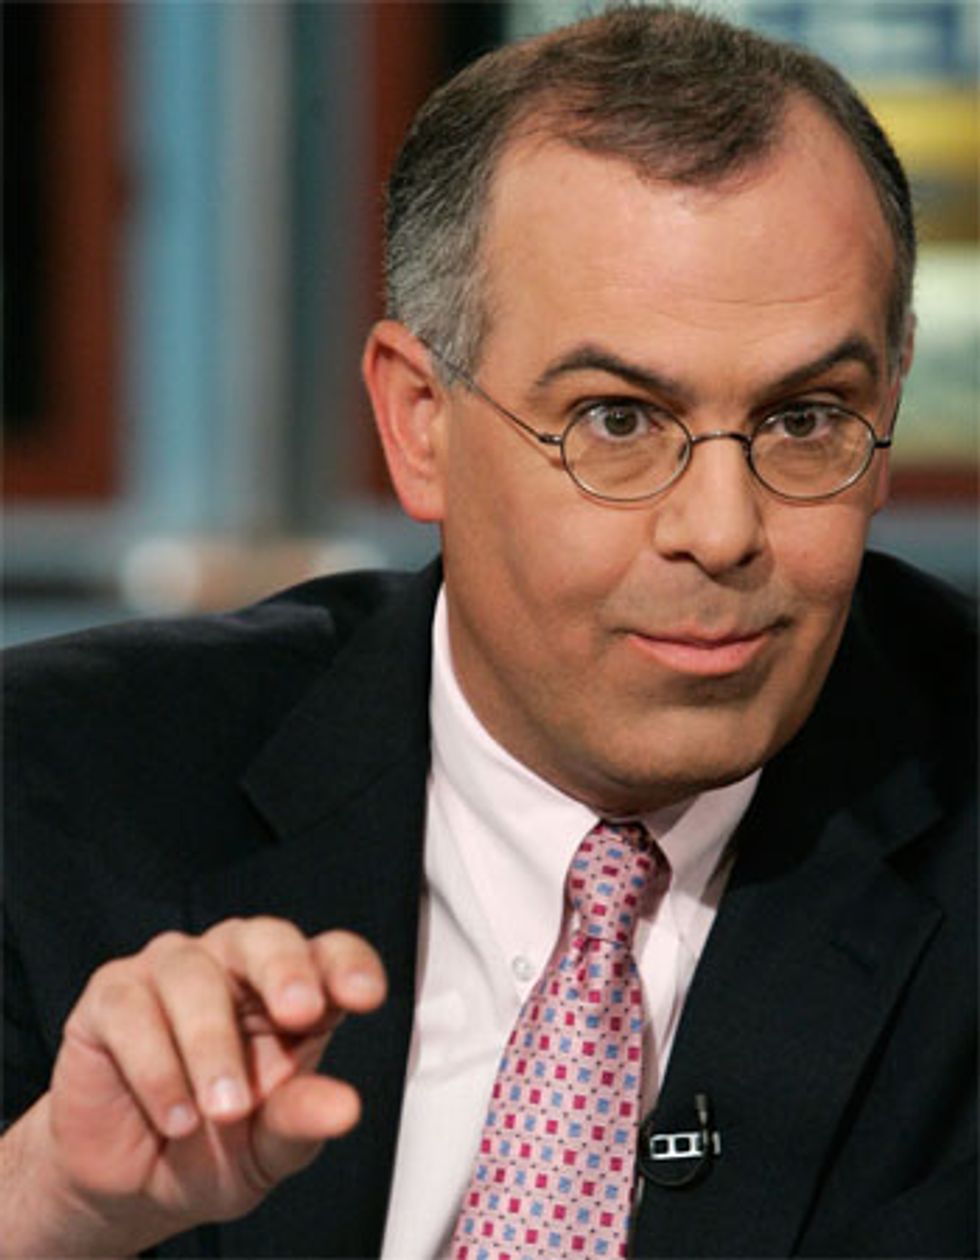 David Brooks To Teach Next Generation Of Elites To Be 'Humble,' At Yale